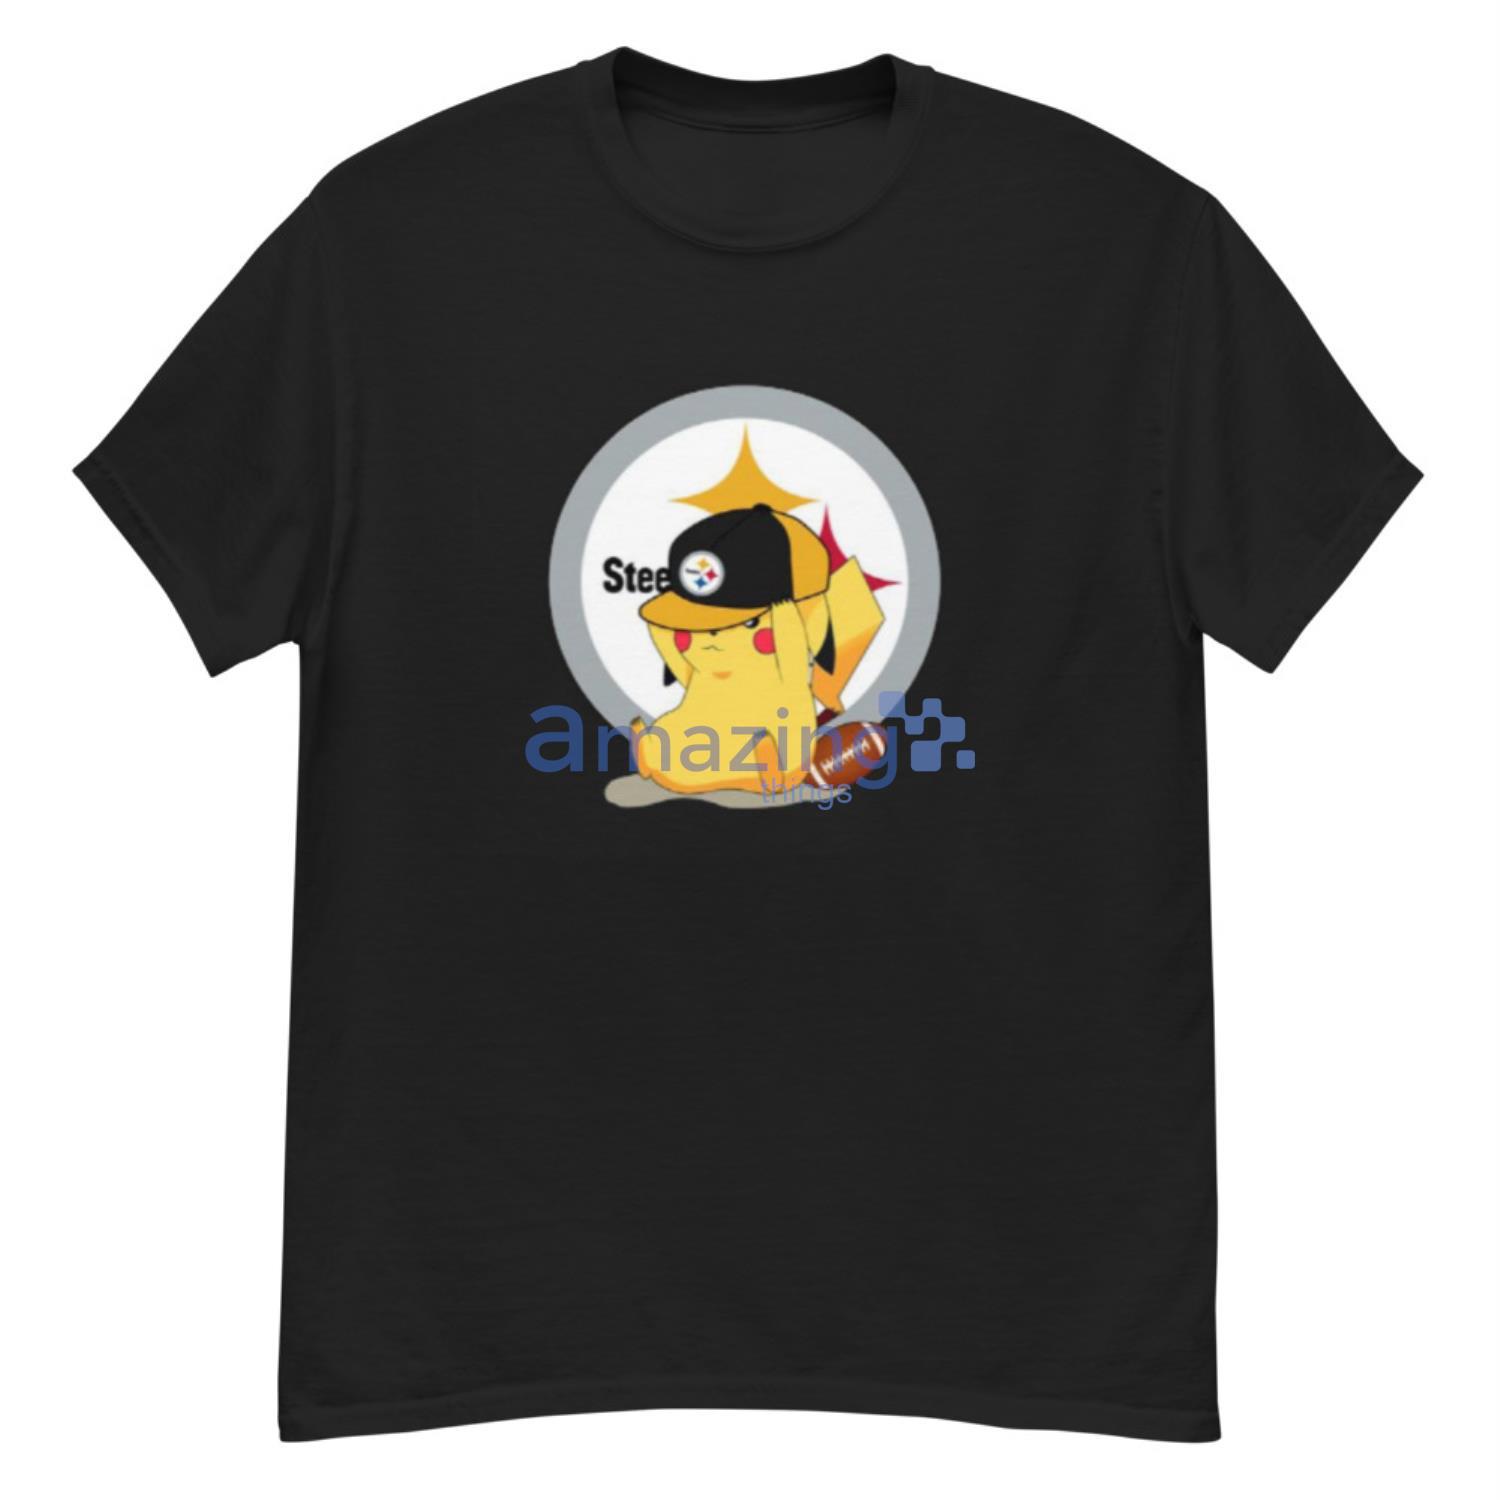 Cheap Pittsburgh Steelers Apparel, Discount Steelers Gear, NFL